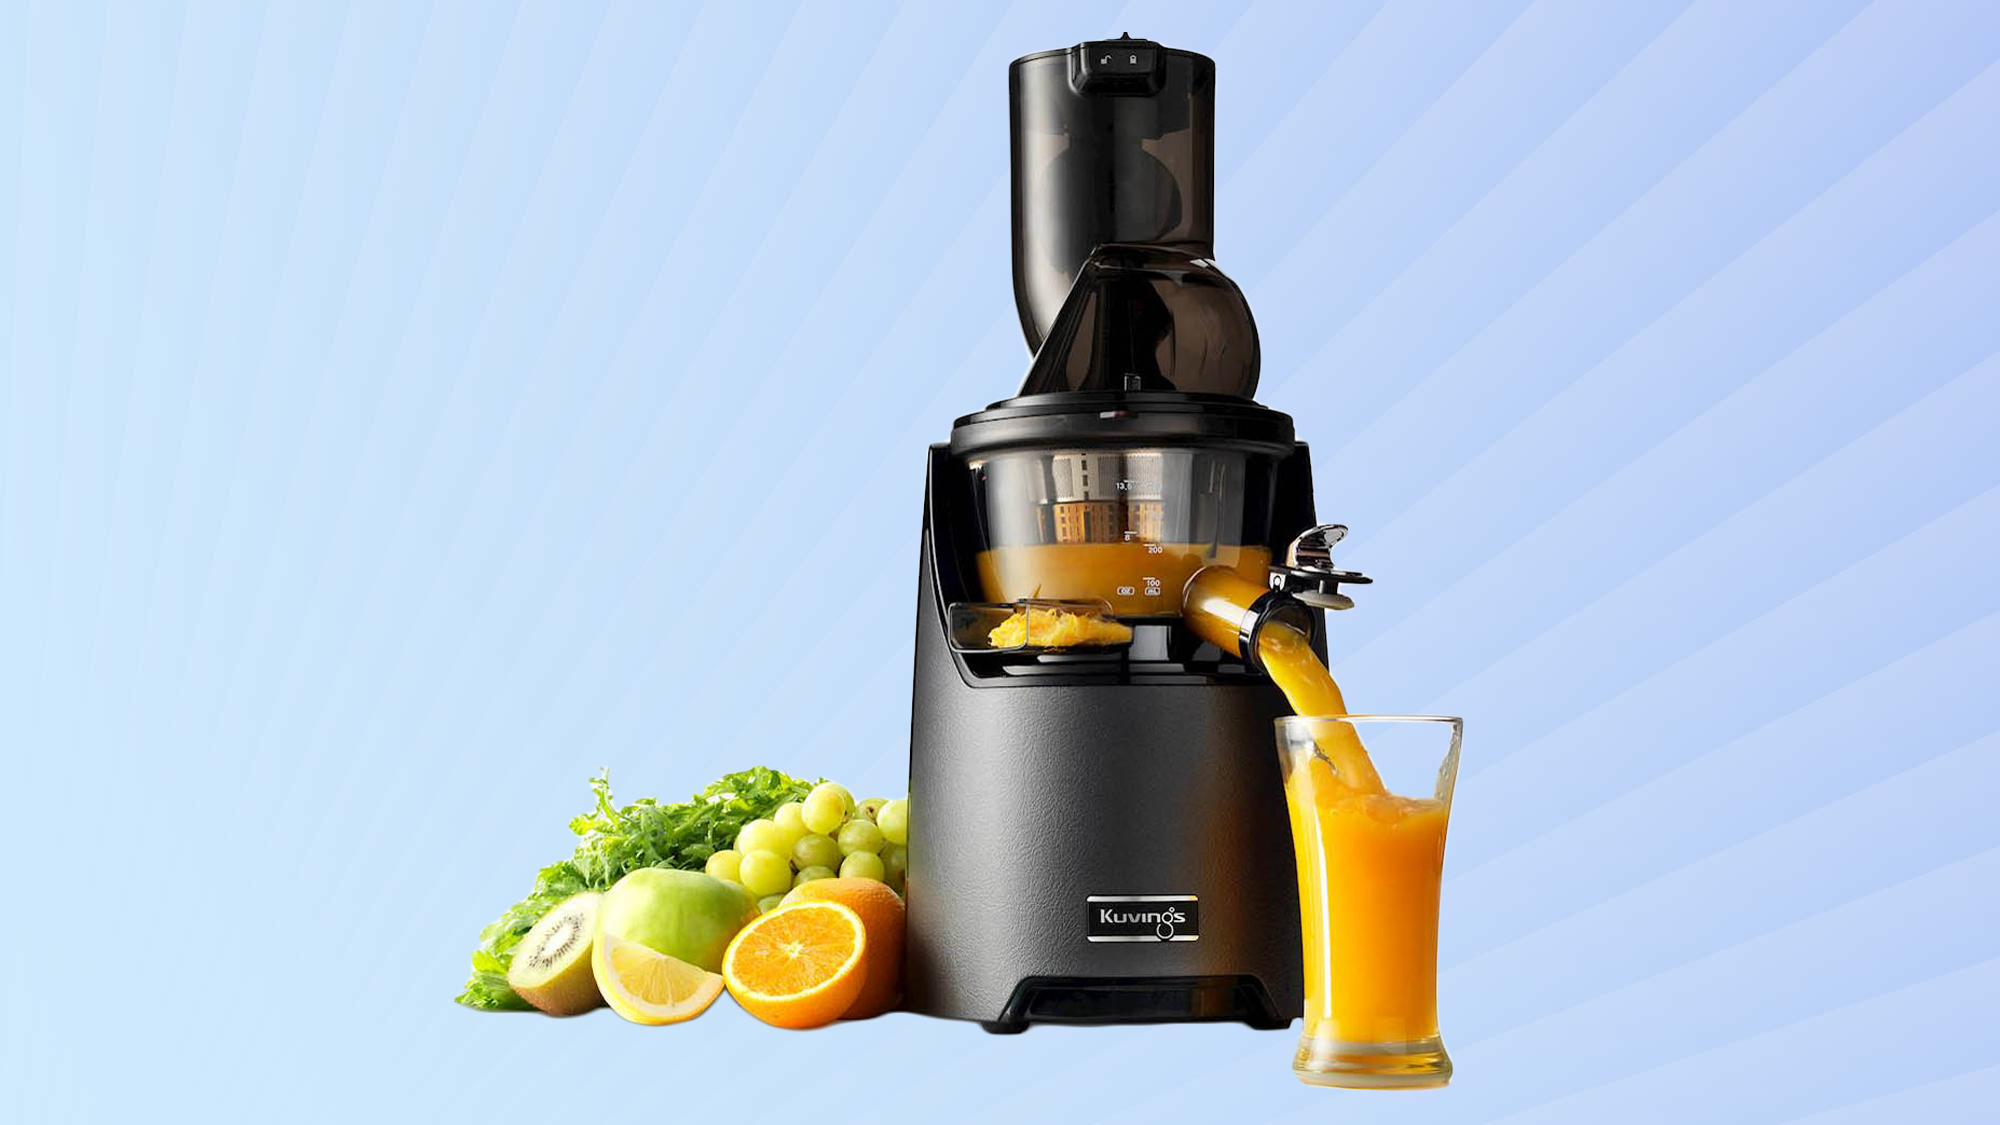 Kuvings Whole Slow Juicer review | Tom's Guide